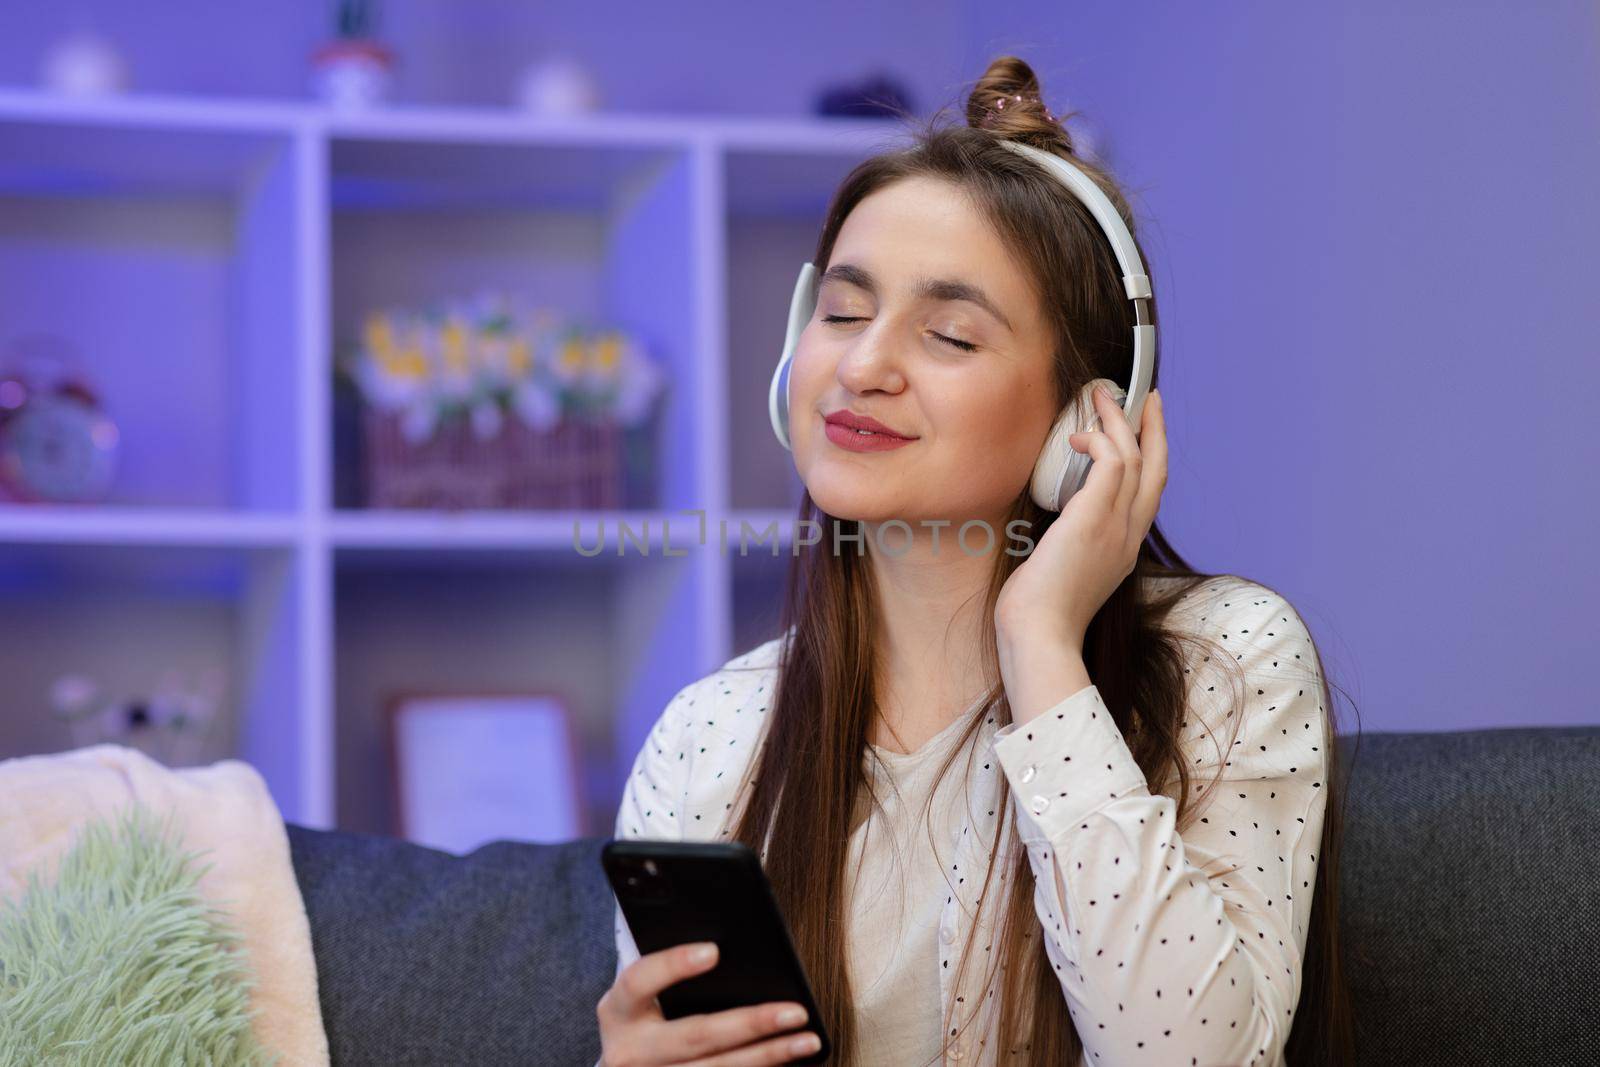 Attractive girl enjoying music through headphones sitting on sofa. Young Woman Listening To Music. by uflypro